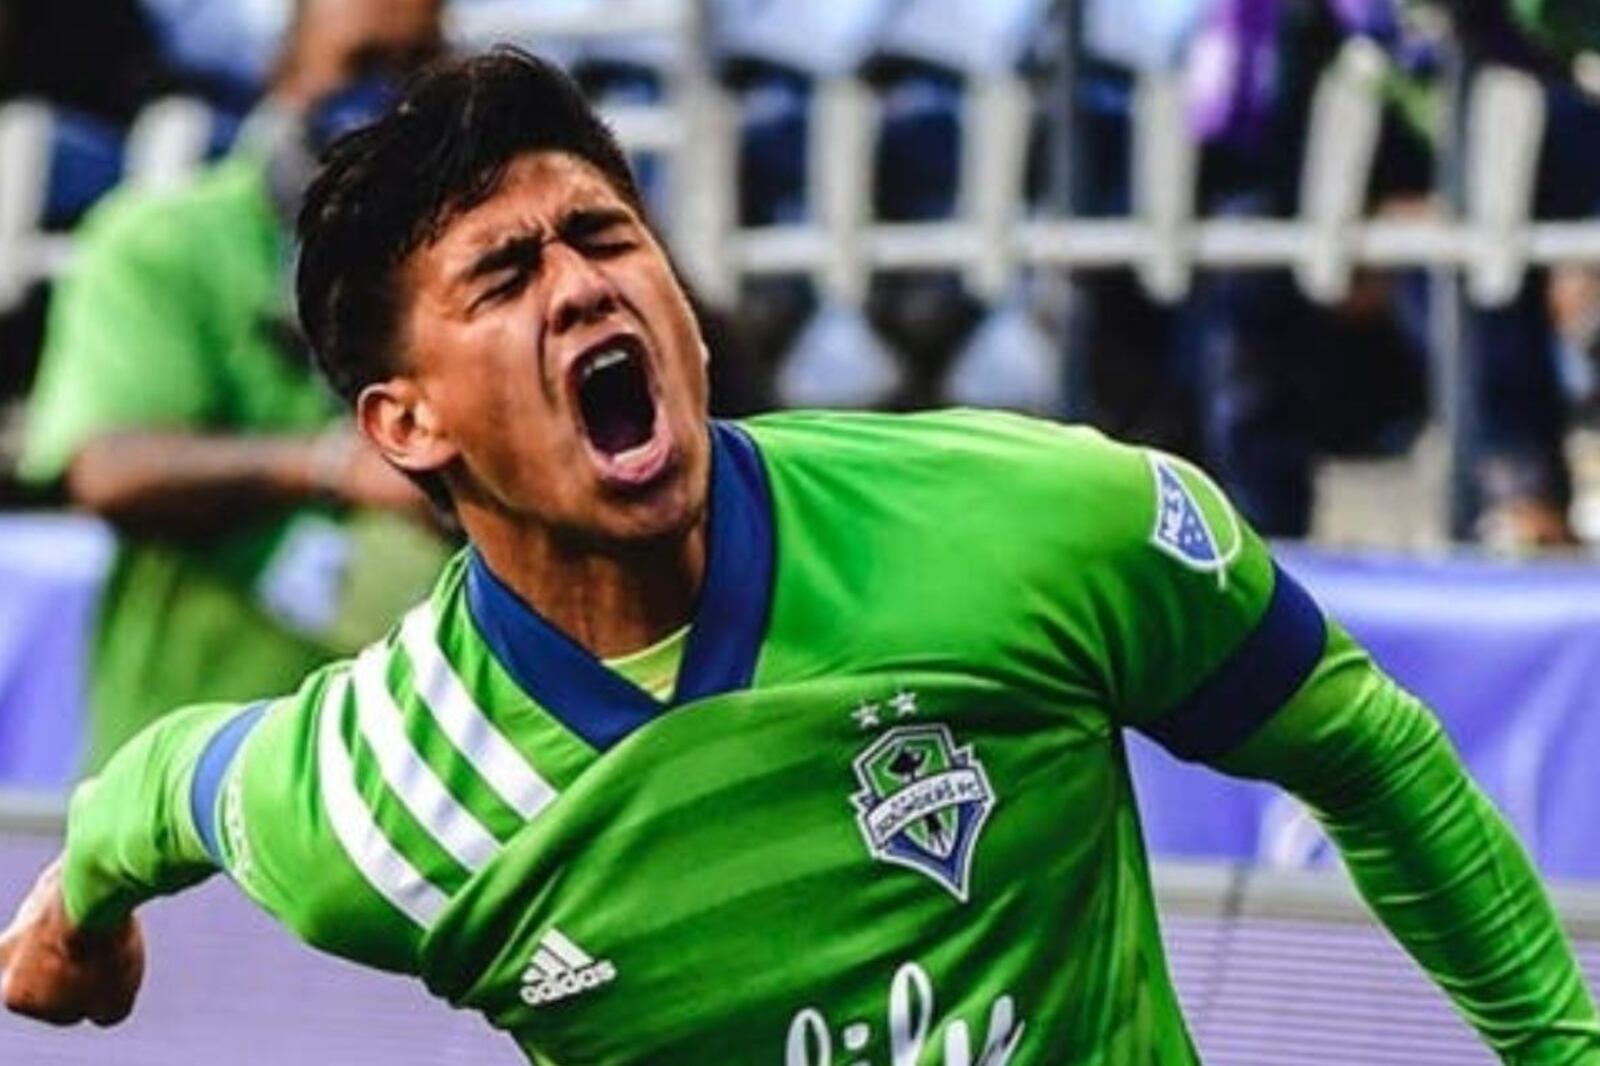 The MLS player who has a big problem for misuse of social networks